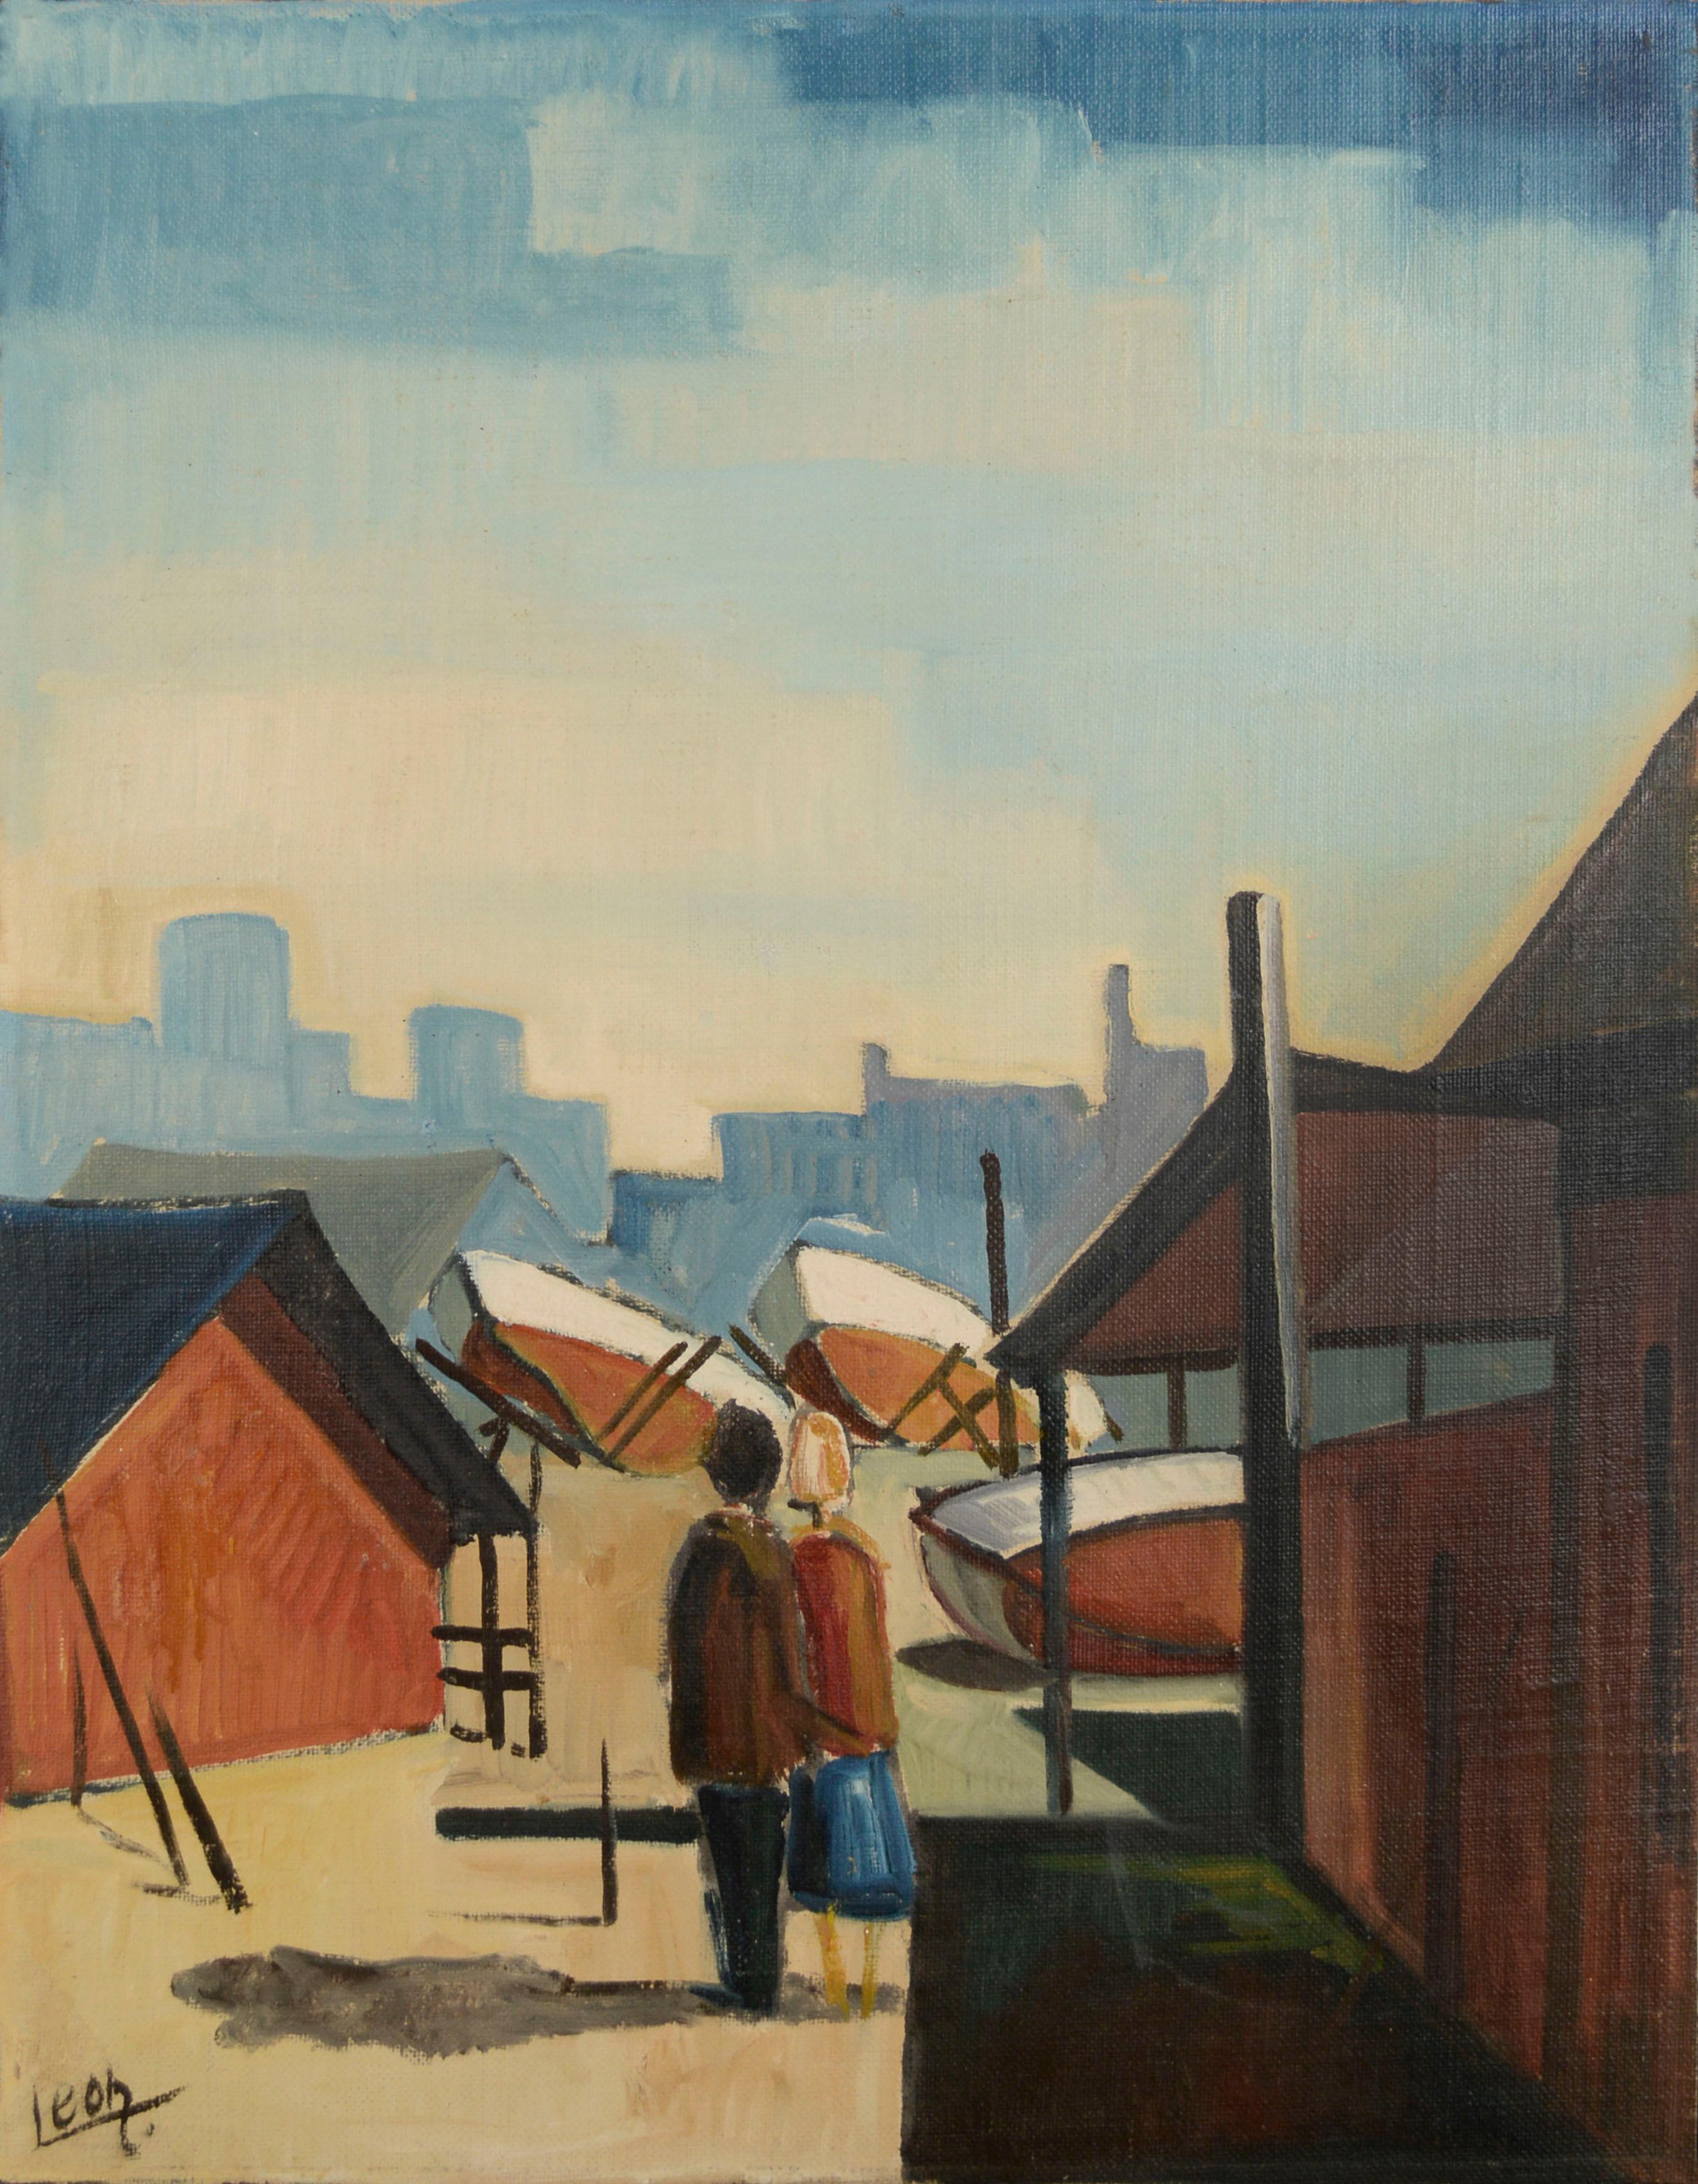 Couple at the Harbor, Mid Century Modern Figurative Cityscape  - Painting by Unknown